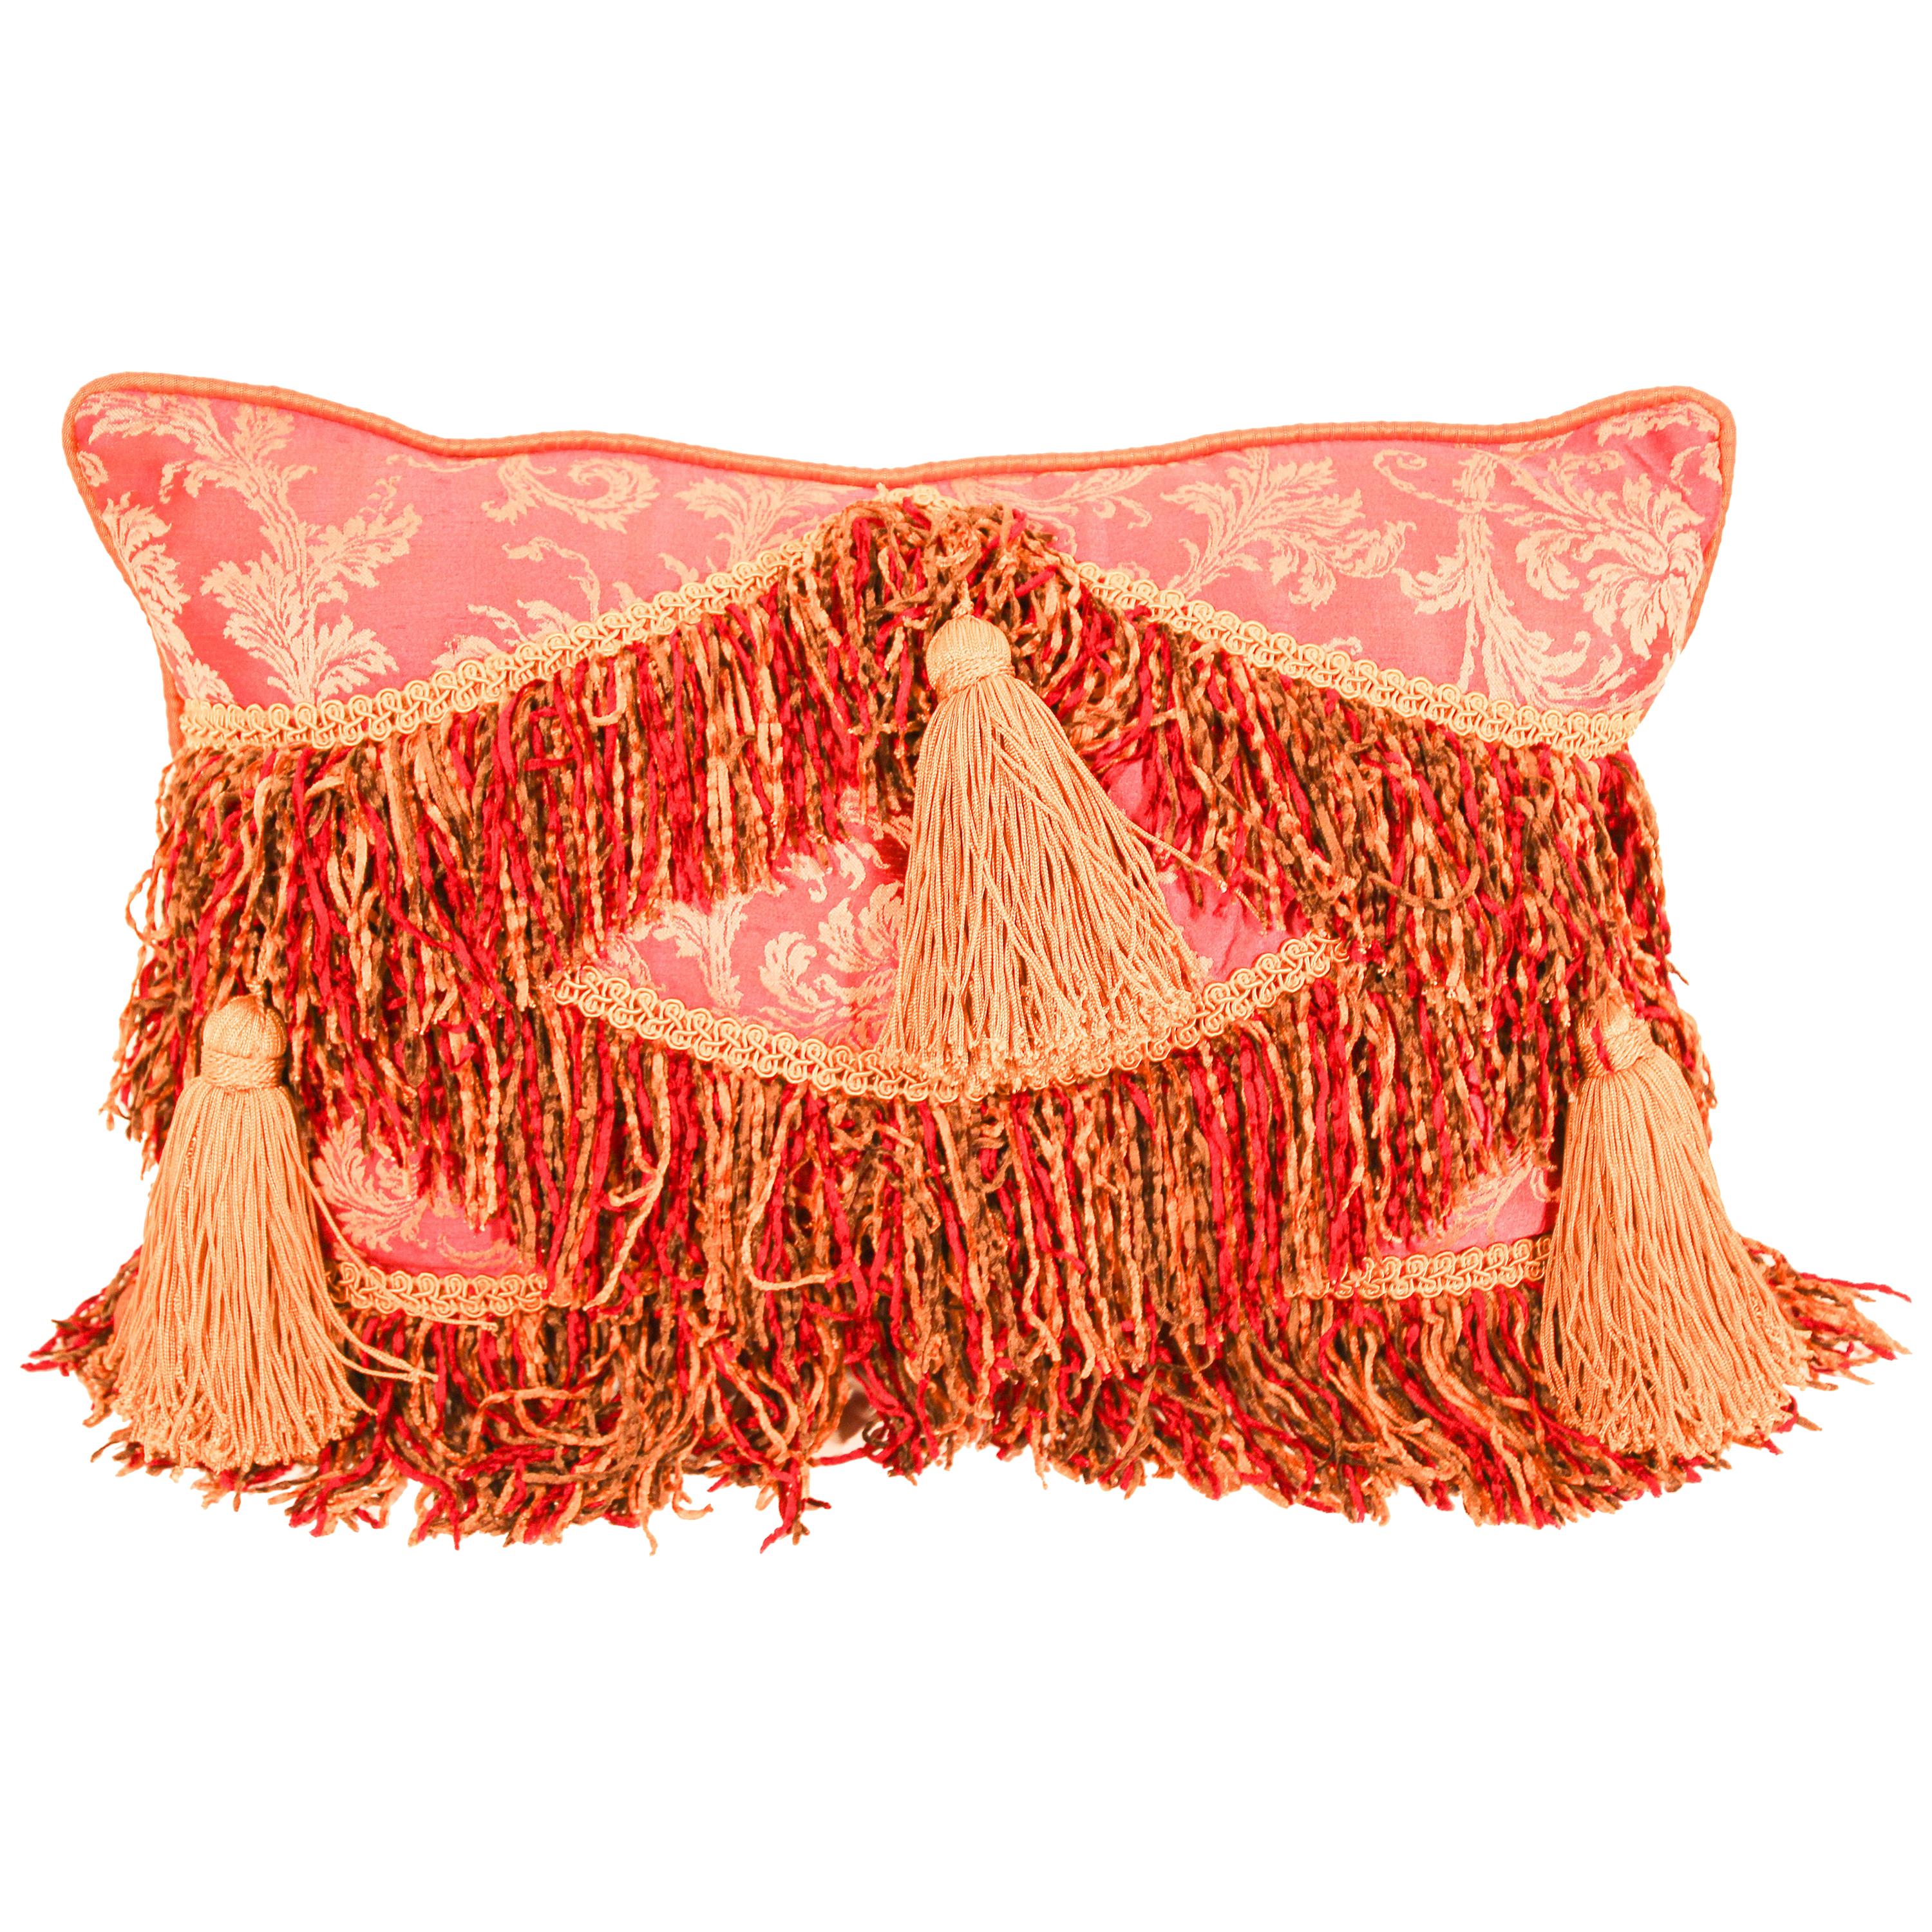 Middle Eastern Decorative Red Throw Pillow For Sale